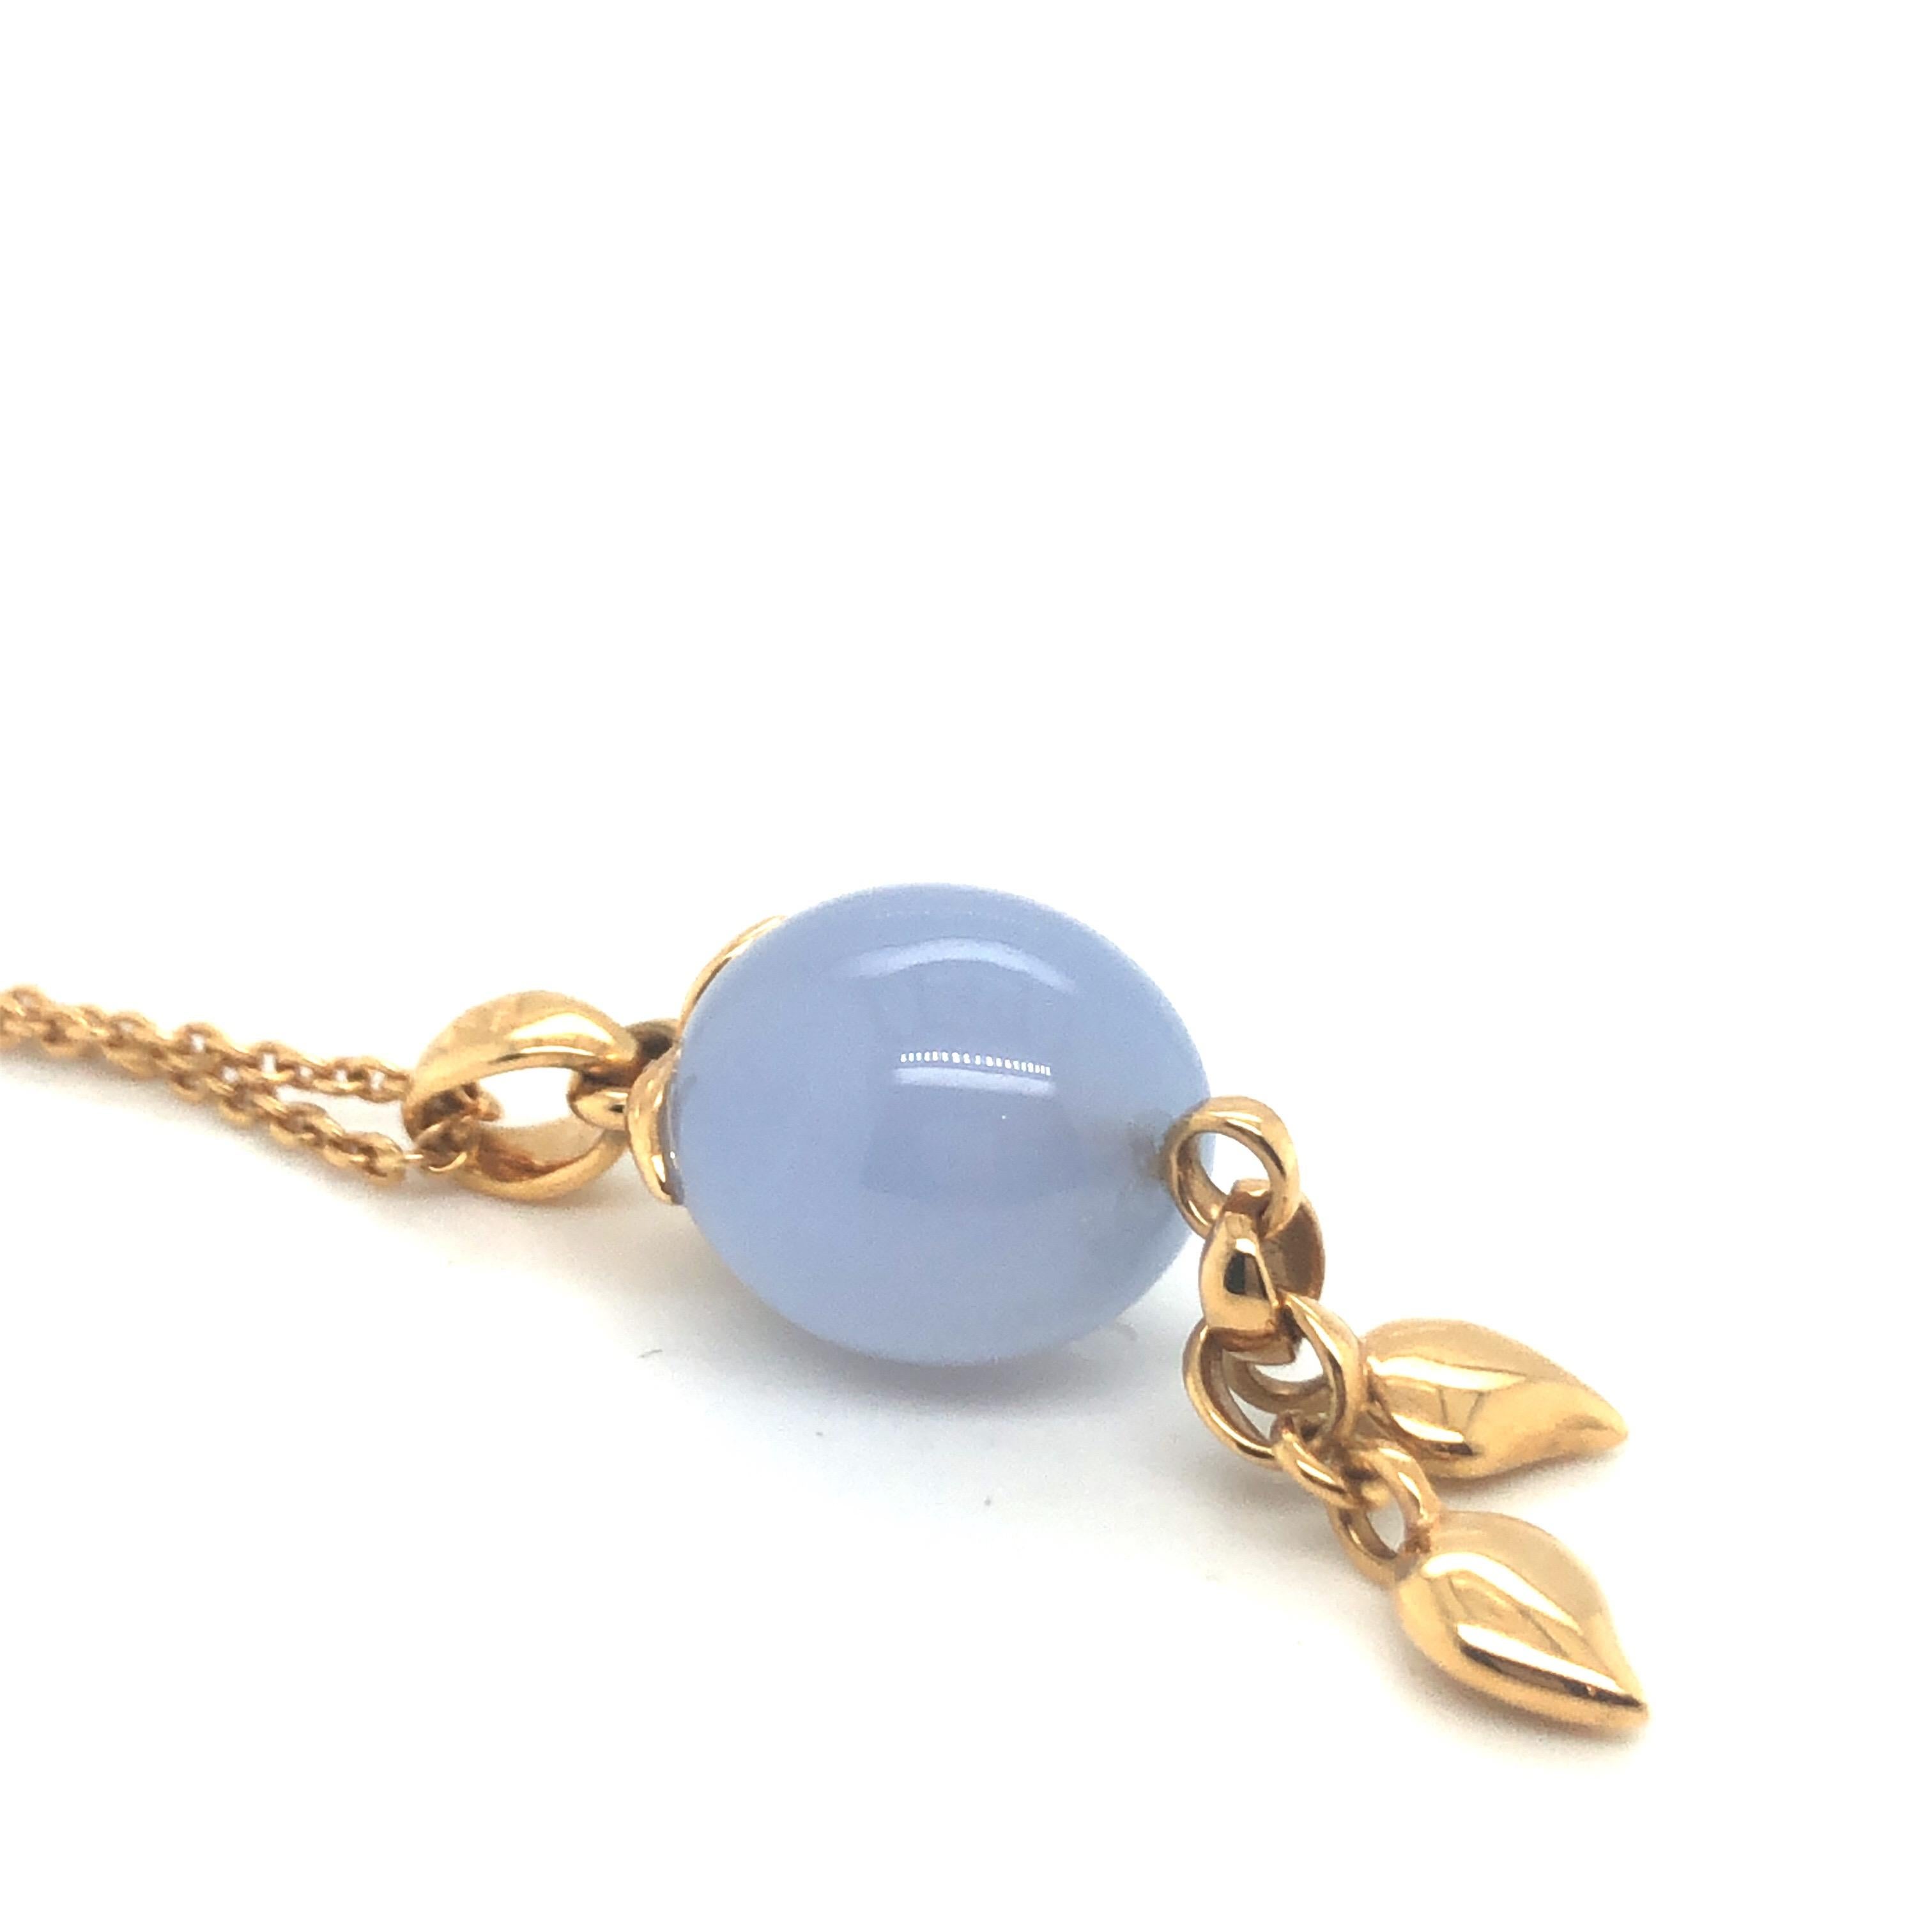 Casual chic 18 karat rose gold and chalcedony Coconut pendant necklace by German jewelry brand Tamara Comolli. 
Tamara Comolli's Coconut pendant is set in 18 karat rose gold and features a beautiful olive-shaped blue Chalcedony and two drop-shaped